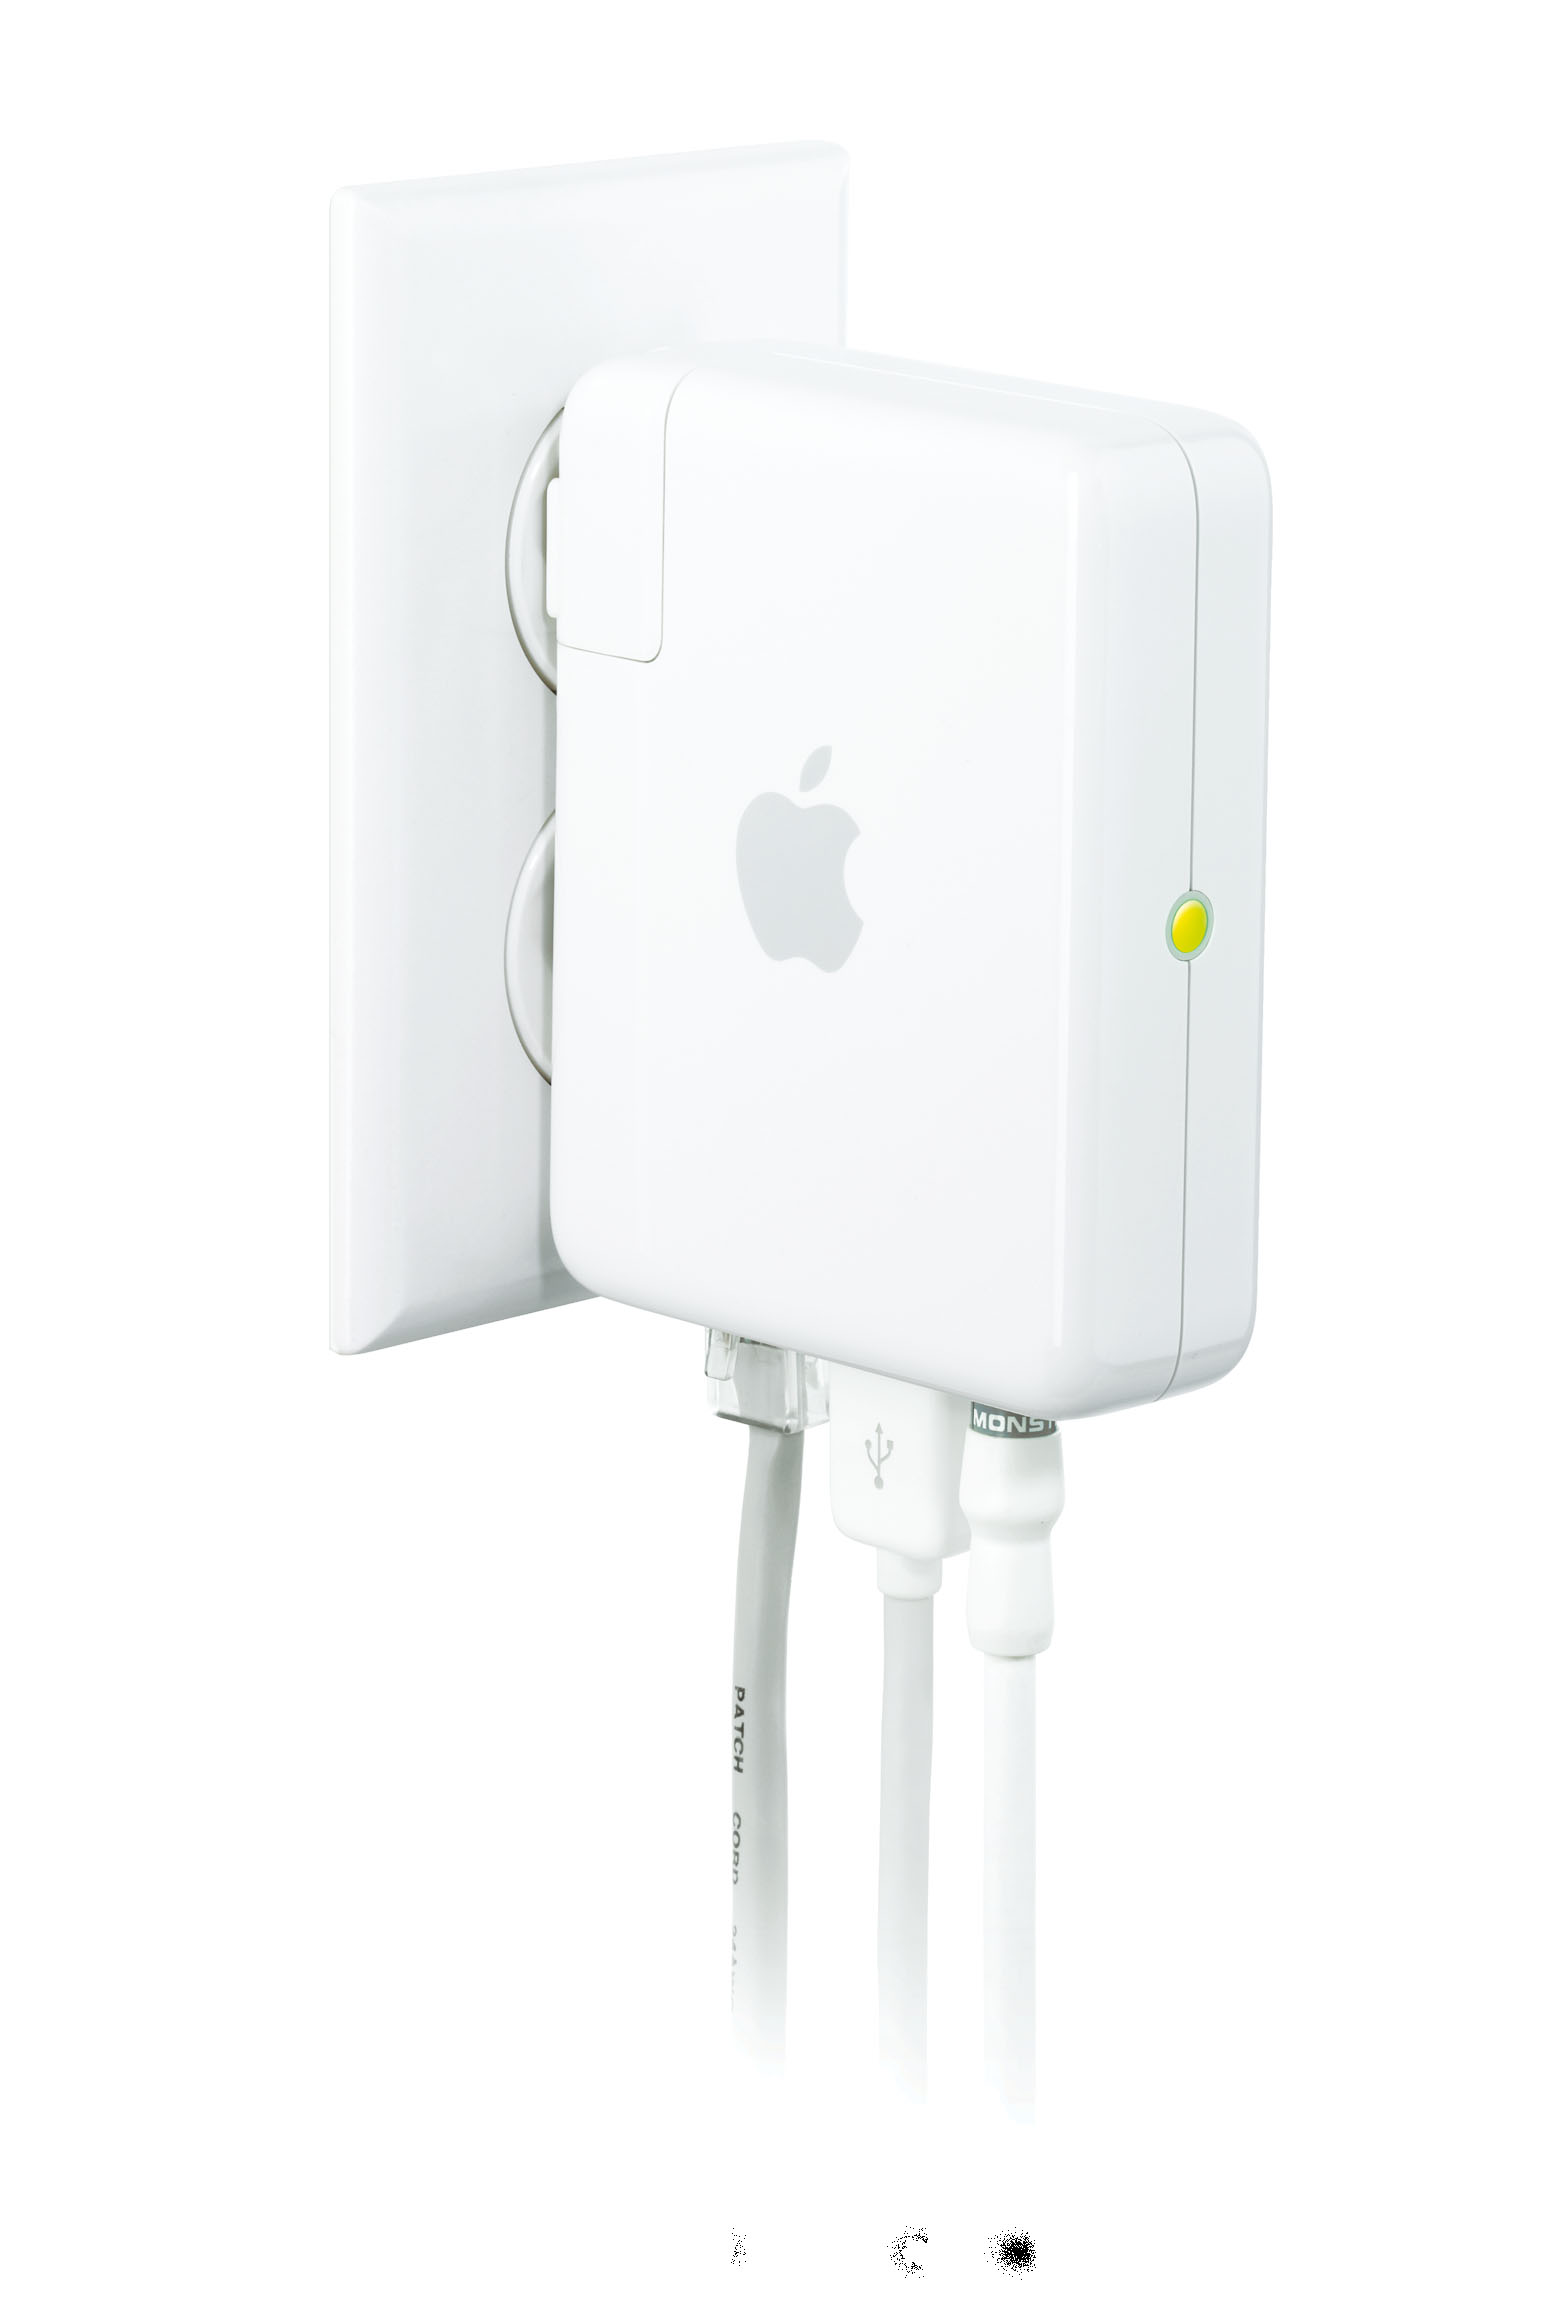 AirPort Express 1st generation | iCreate Issue 218